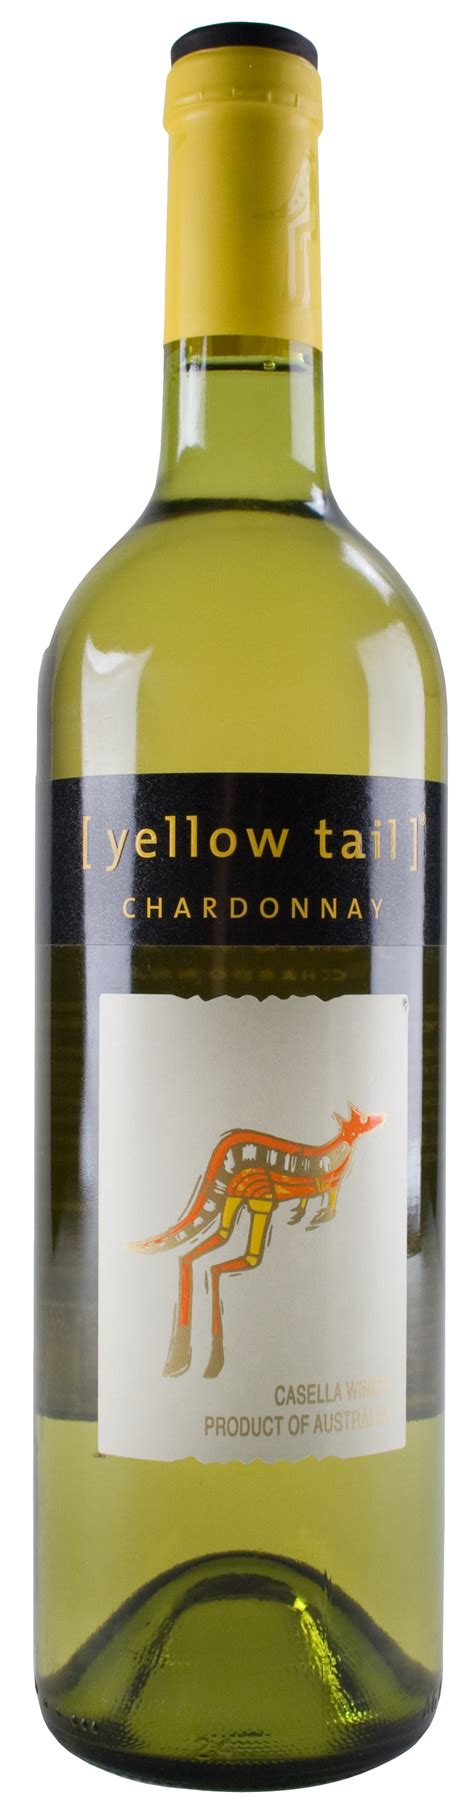 Yellow Tail Wine Bottle Png Image Purepng Free Transparent Cc0 Png